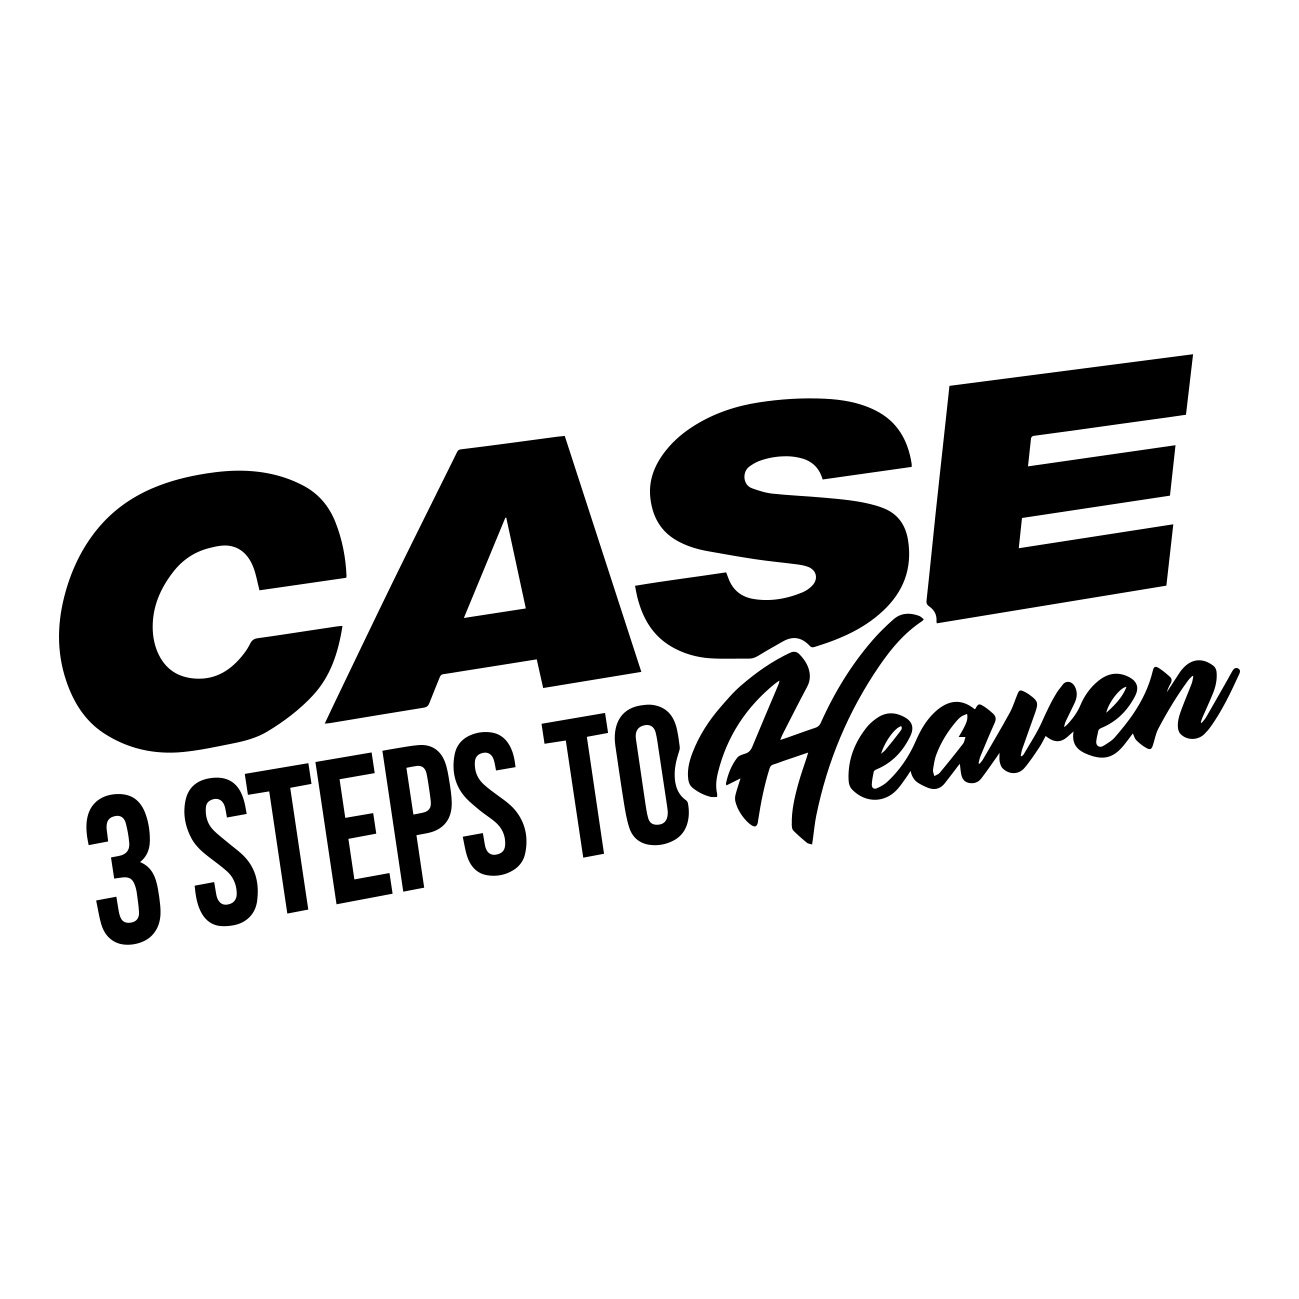 case 3 steps to heaven